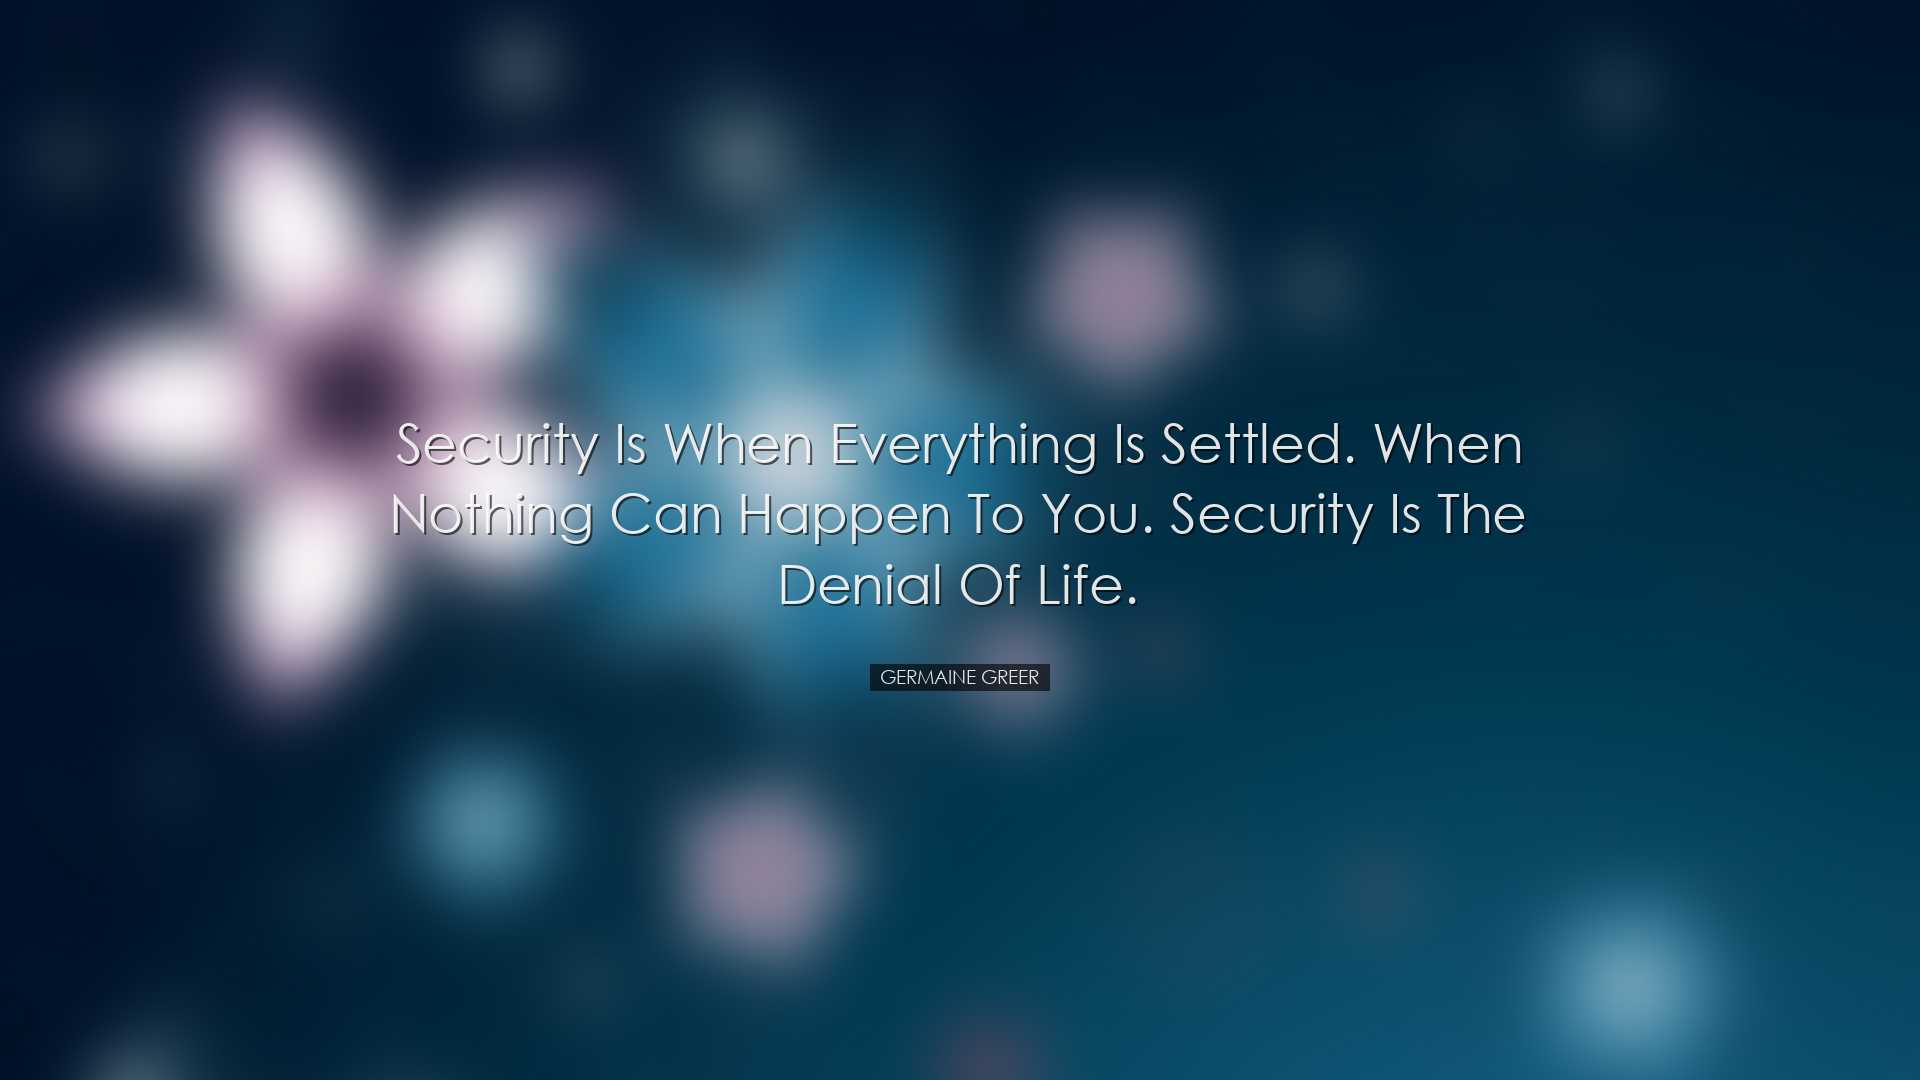 Security is when everything is settled. When nothing can happen to